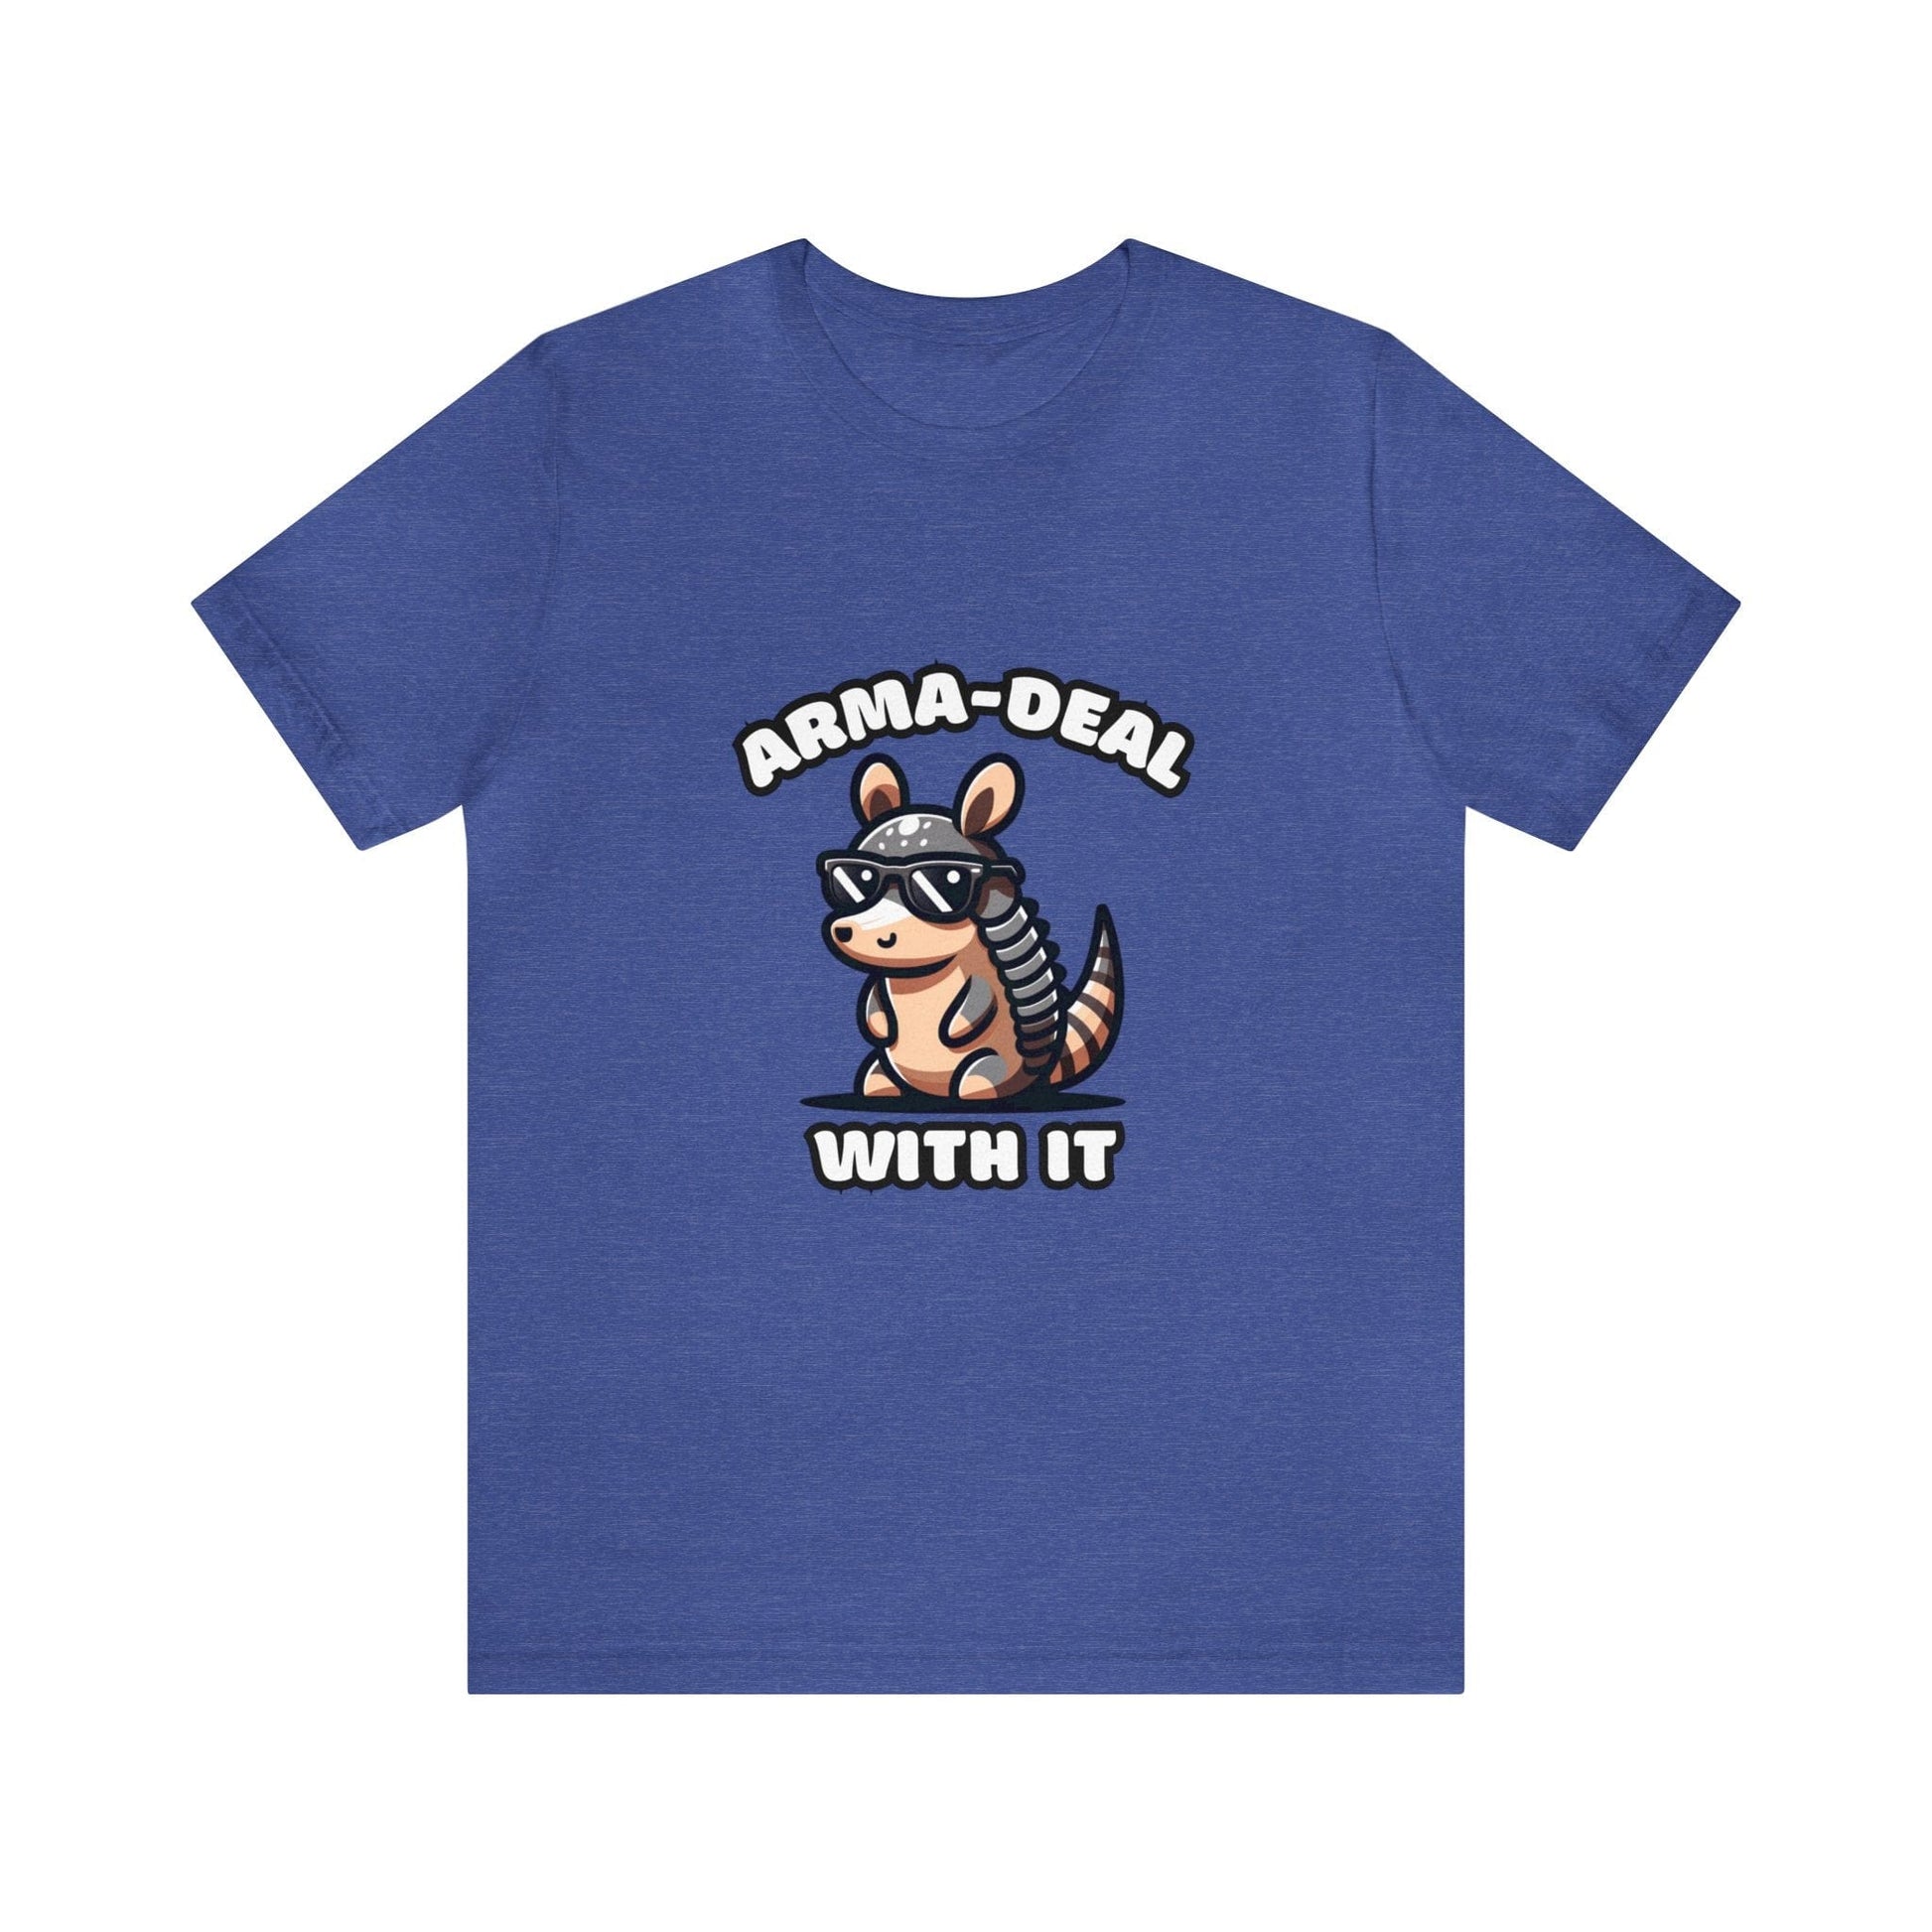 Arma-Deal With It - Armadillo T-shirt